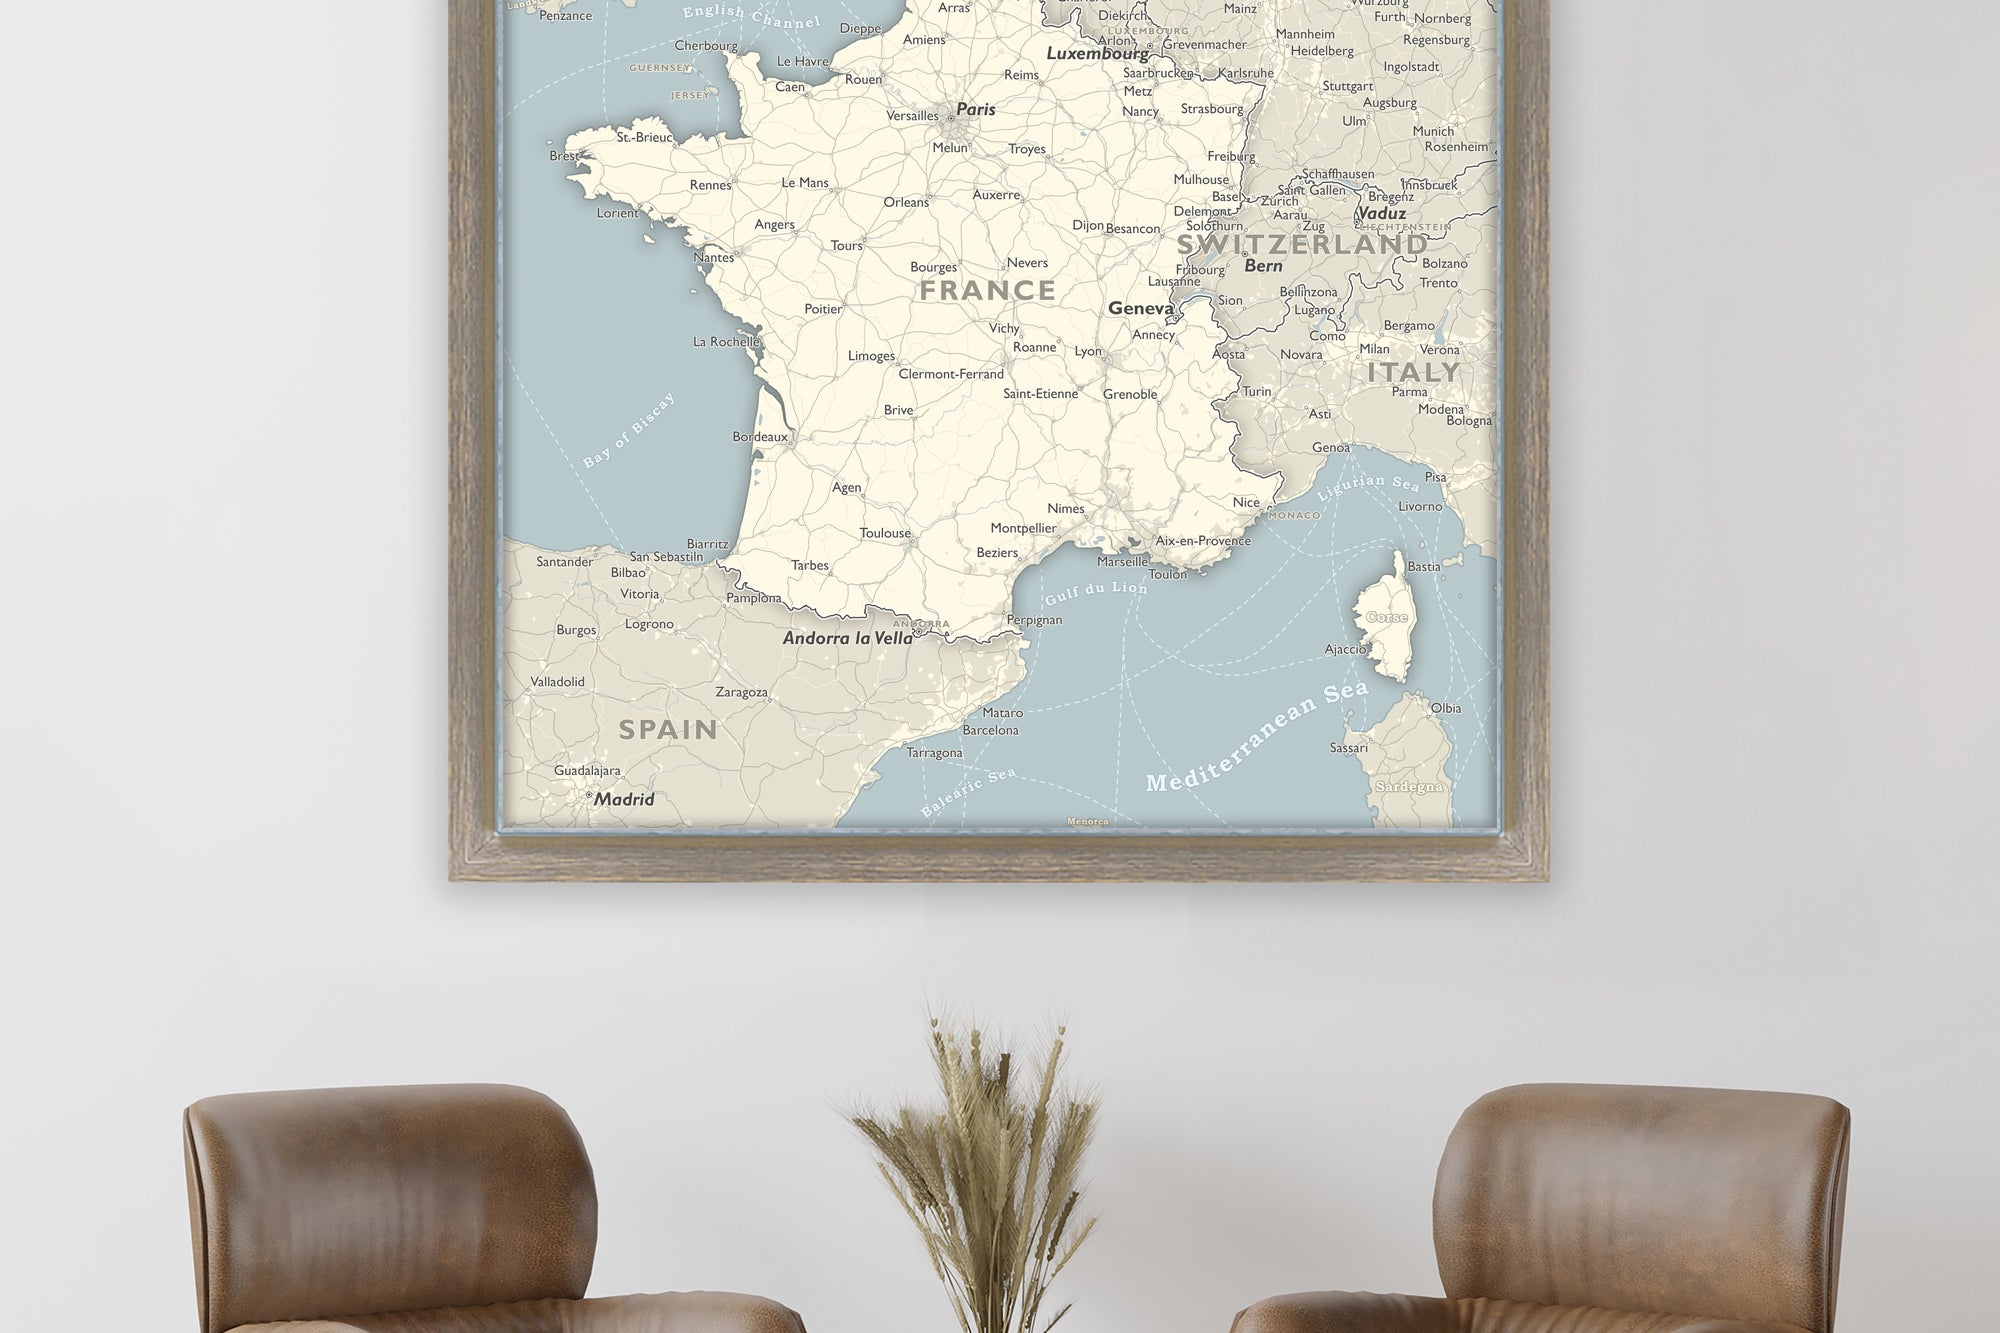 Political Map of France